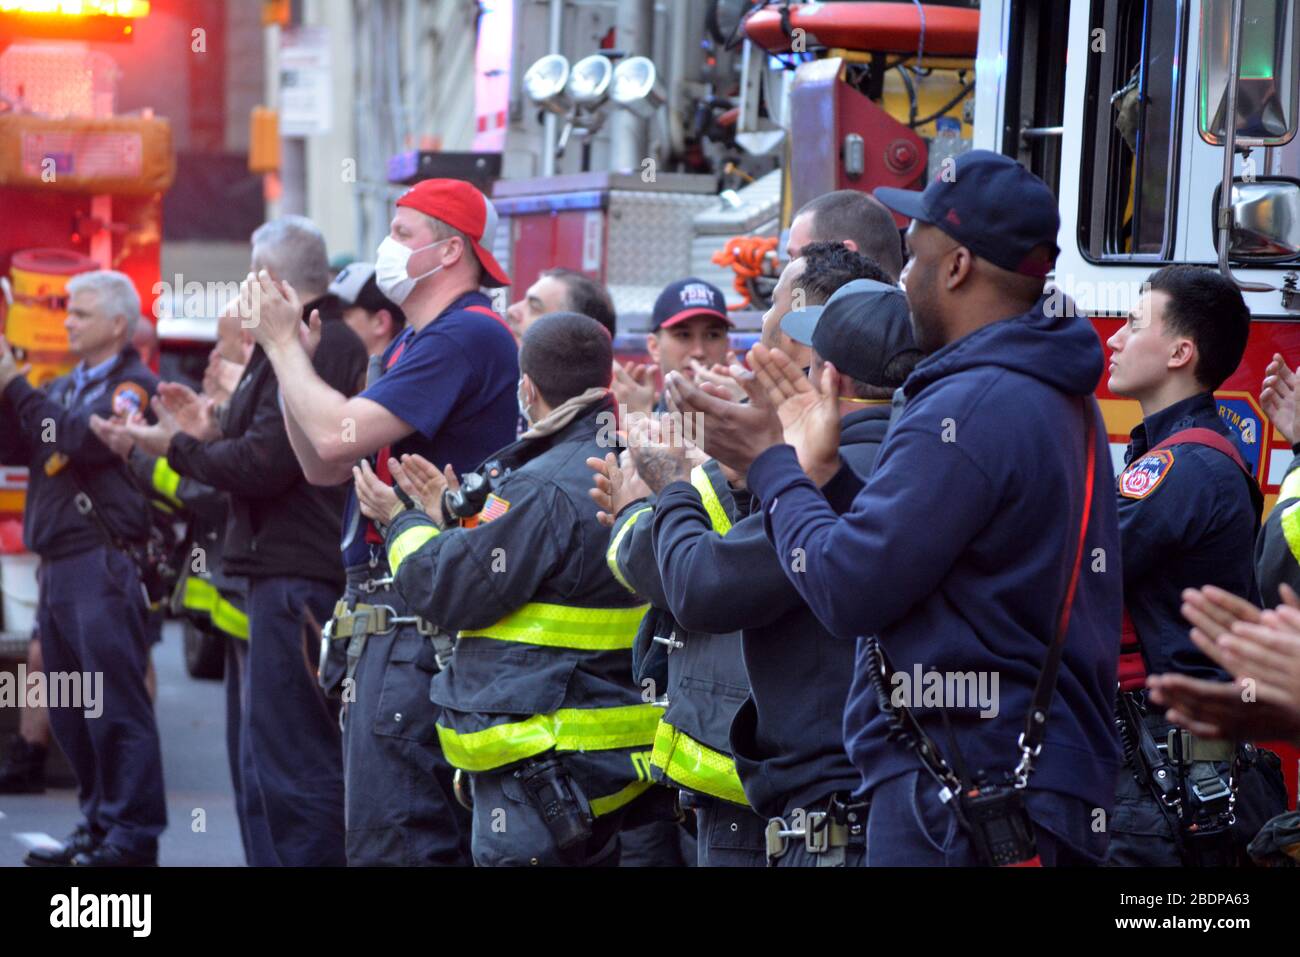 Members of the FDNY across from New York Presbyterian Hospital thanking the staff for their work fighting the coronavirus pandemic in Lower Manhattan. Stock Photo